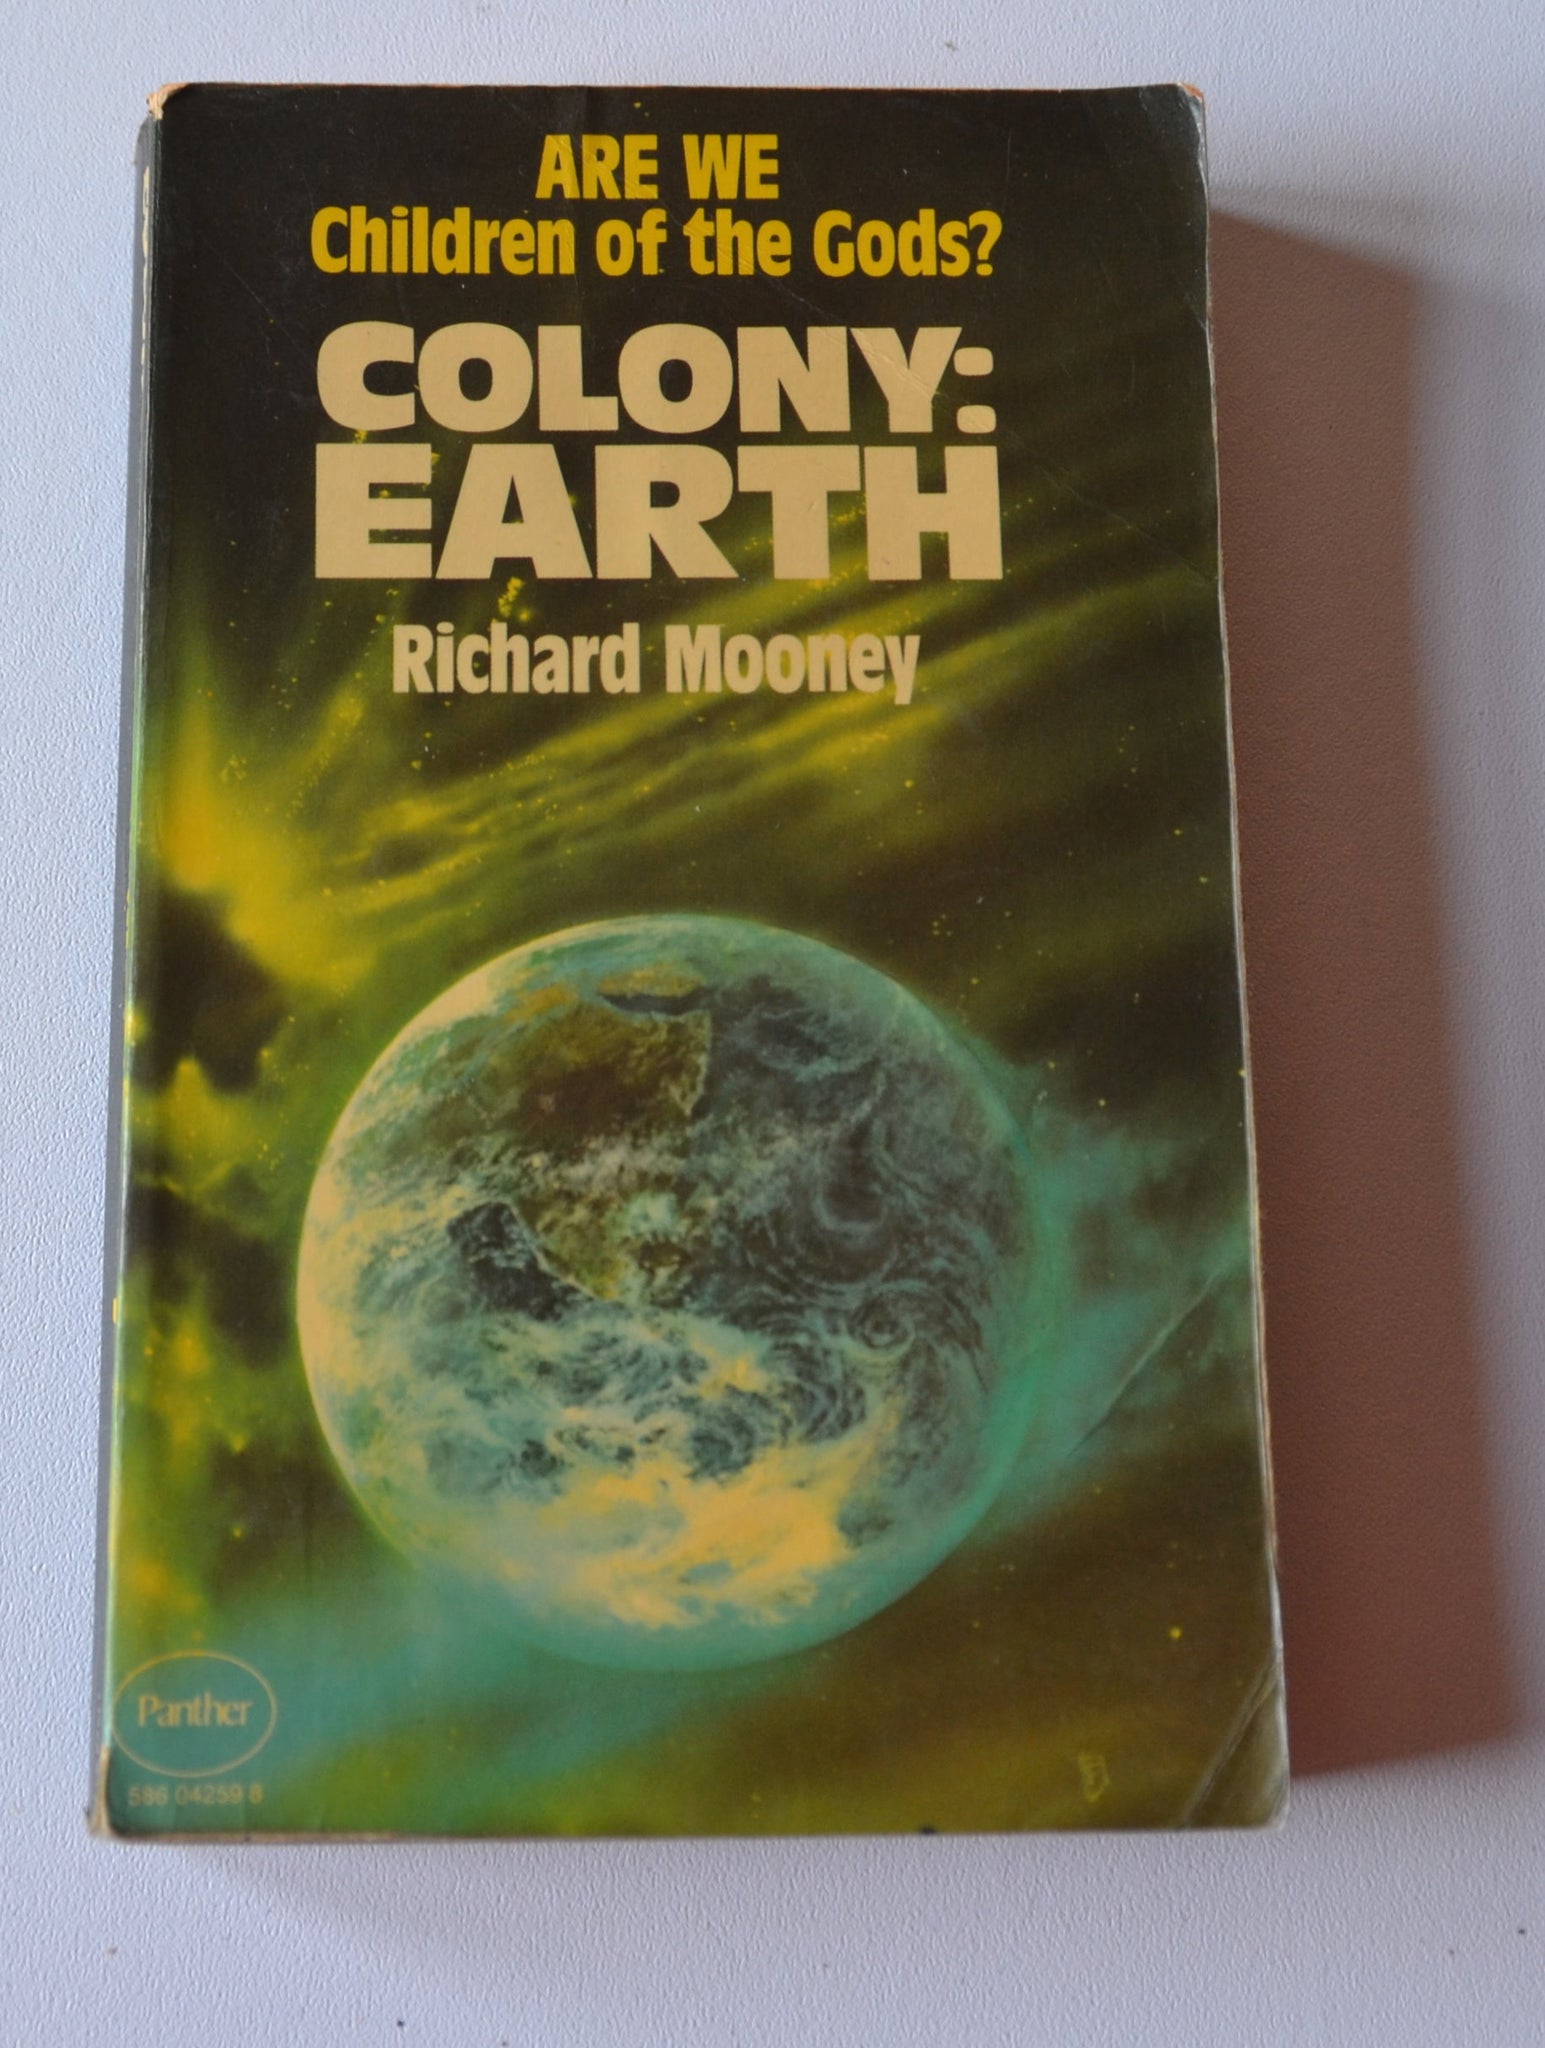 Colony: Earth - ARE WE Children of the Gods?